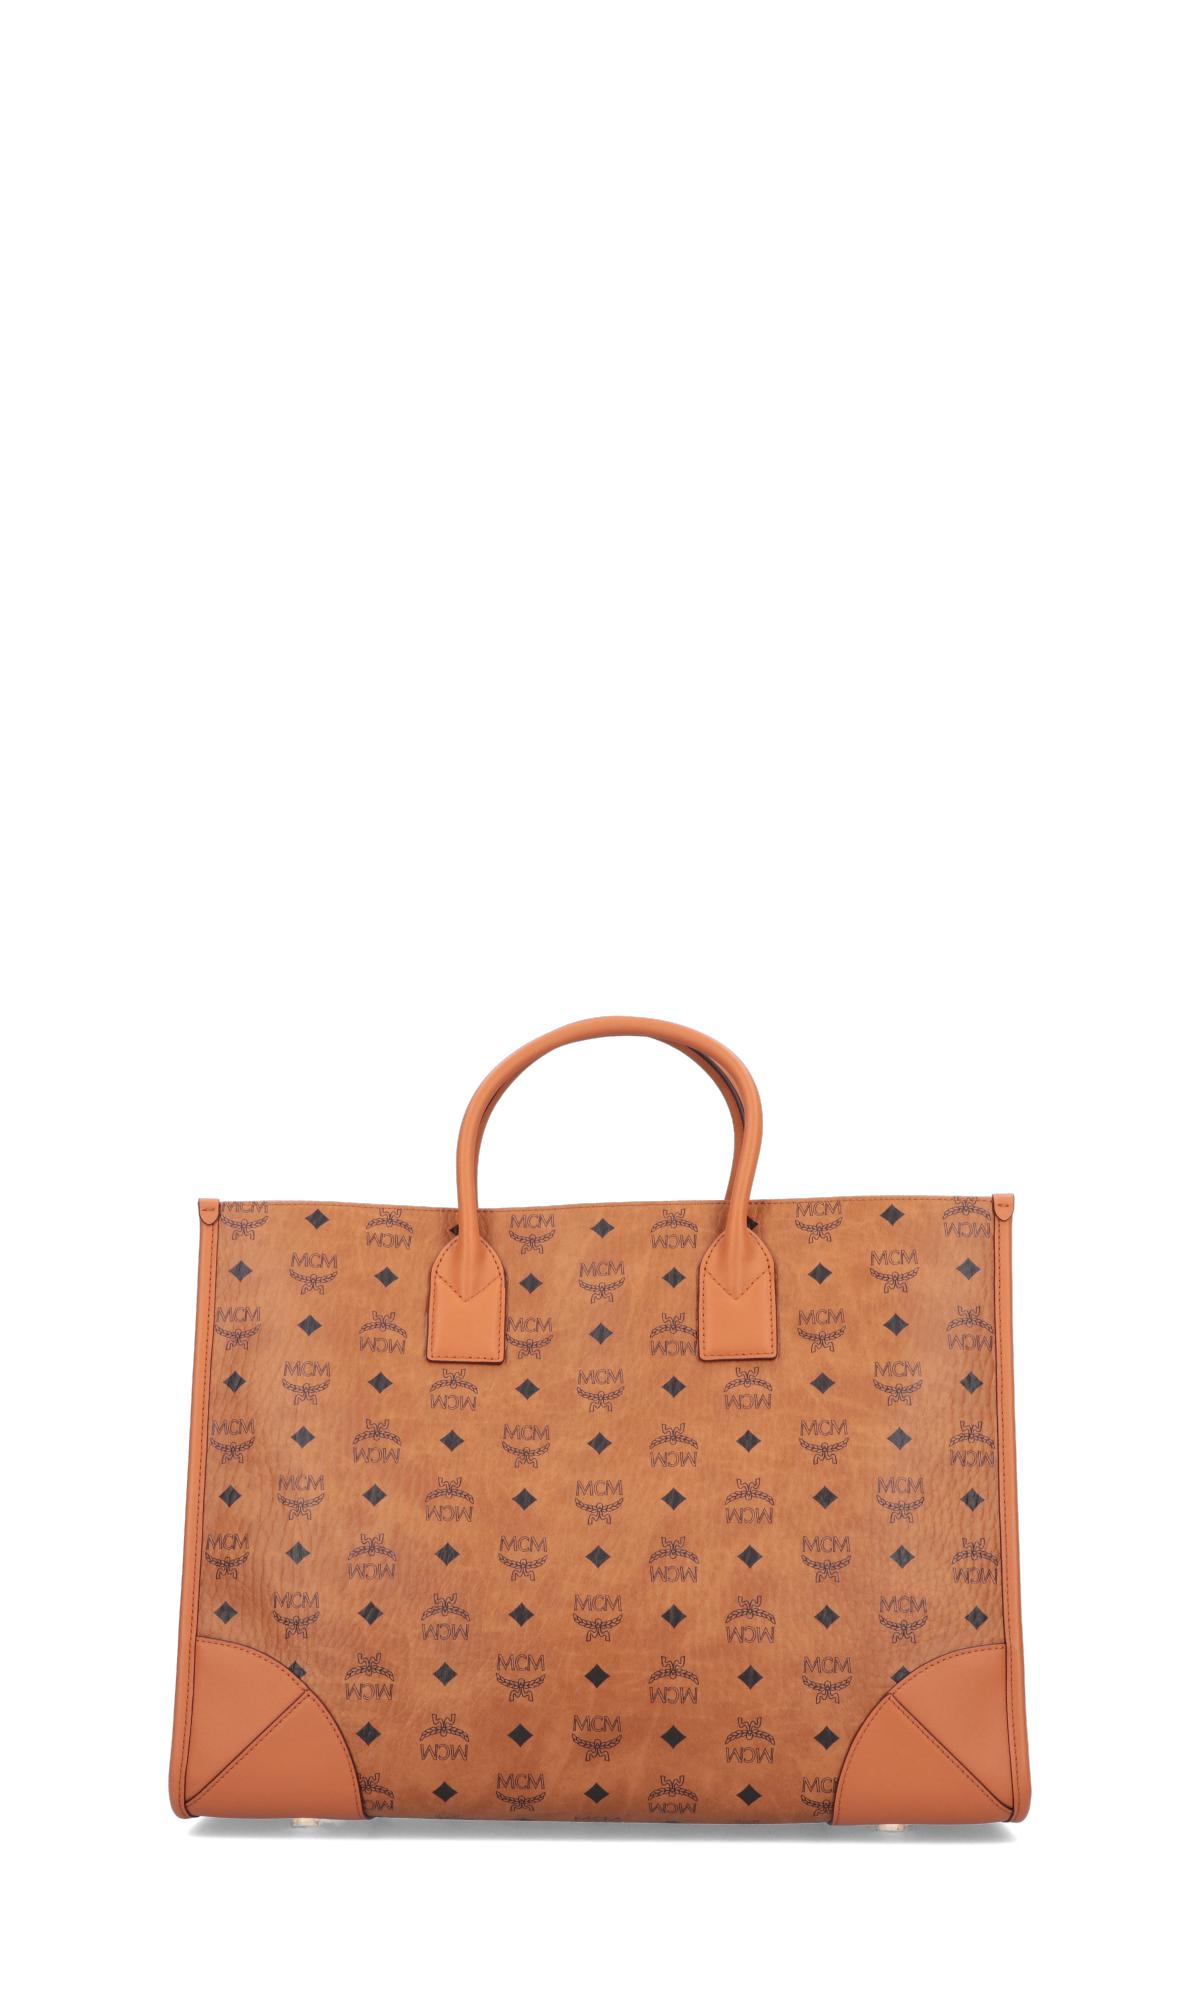 MCM Munchen Large Tote